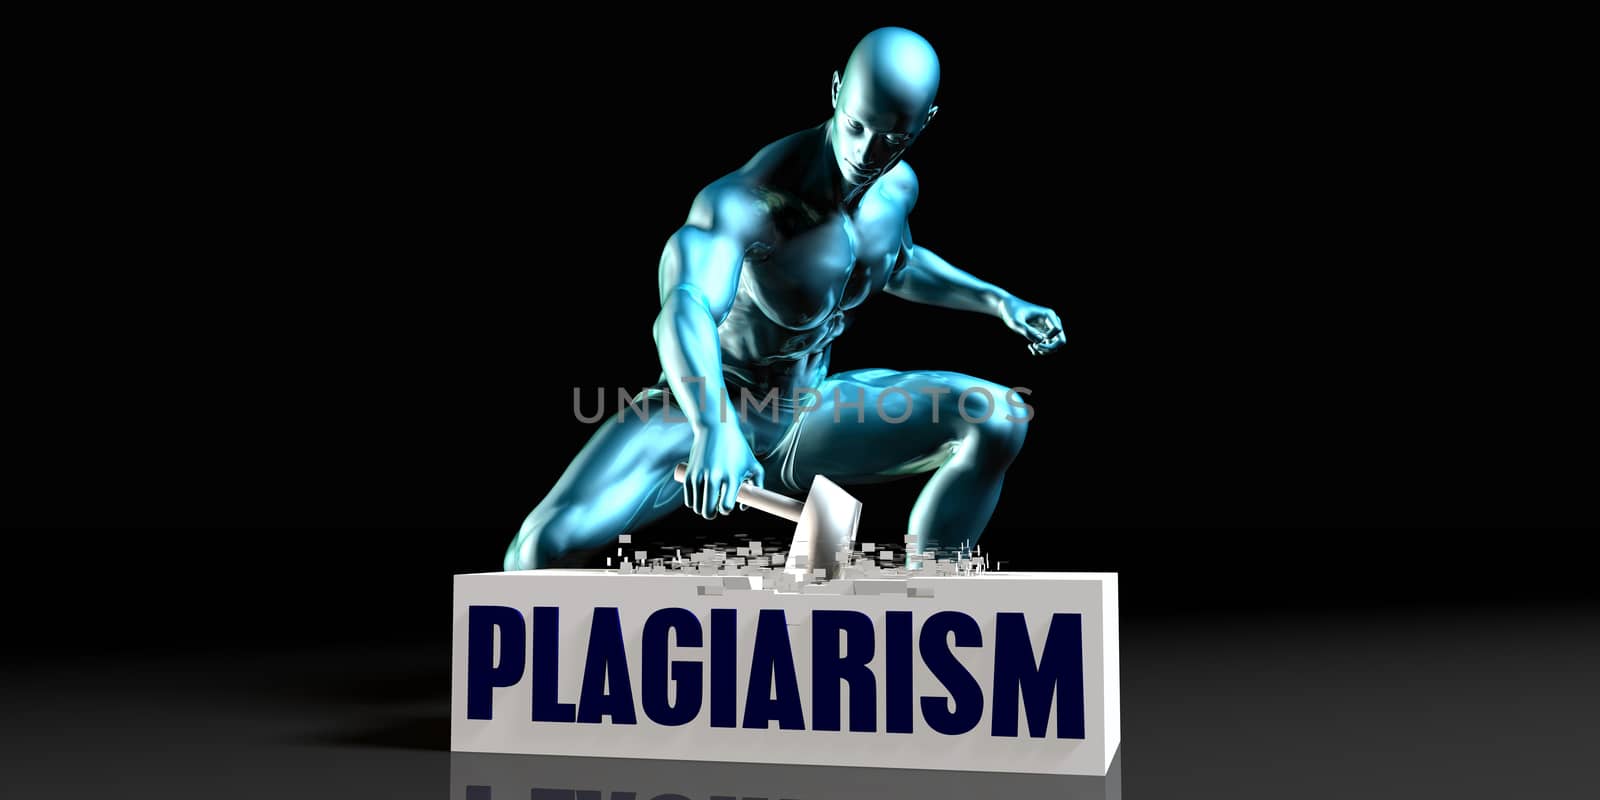 Get Rid of Plagiarism and Remove the Problem